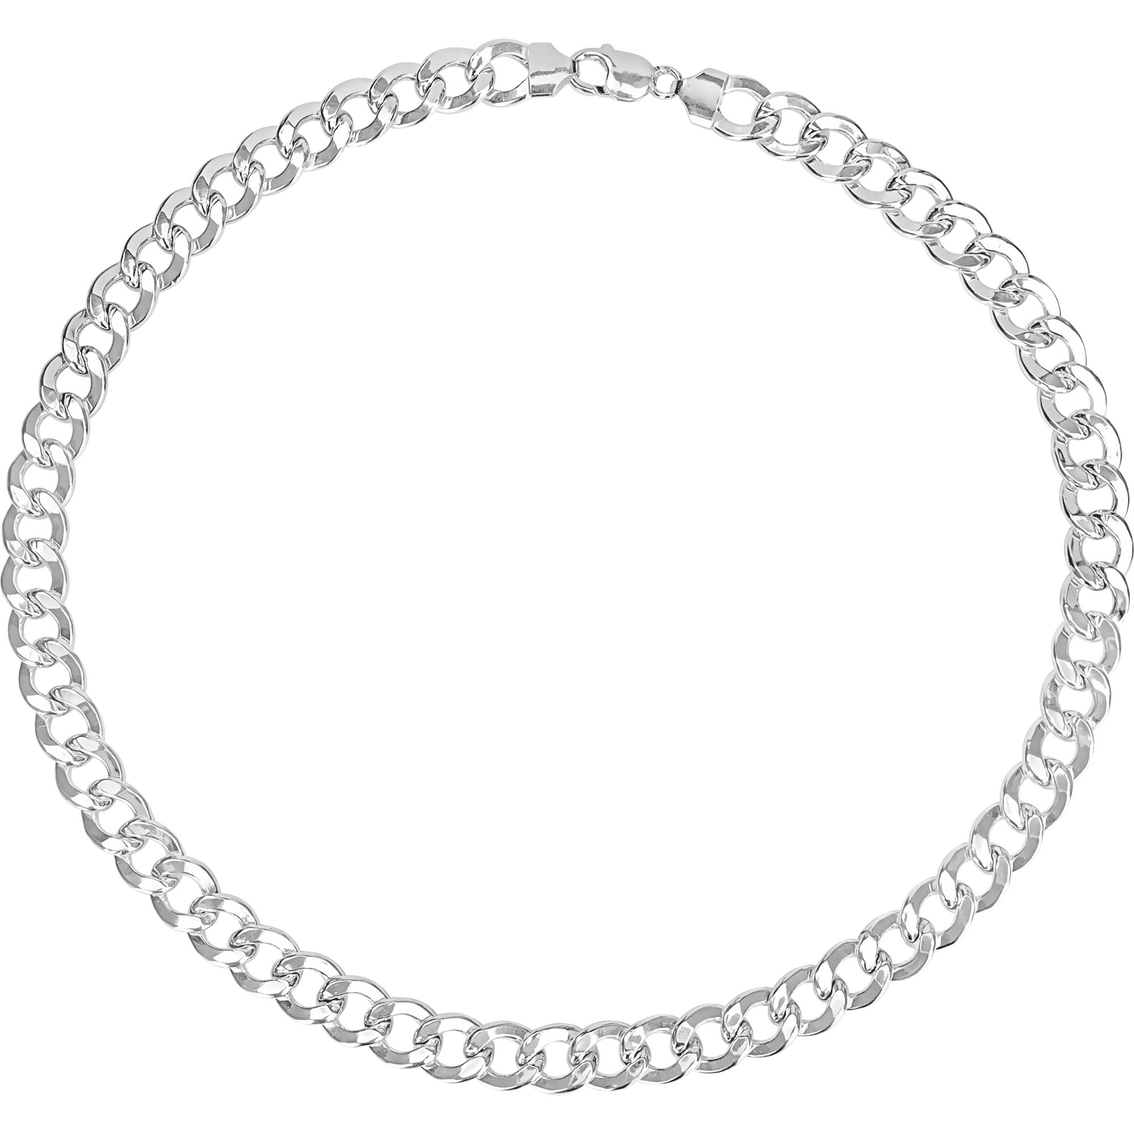 Sofia B. Sterling Silver 12.5mm Curb Link Chain Necklace - Image 3 of 4